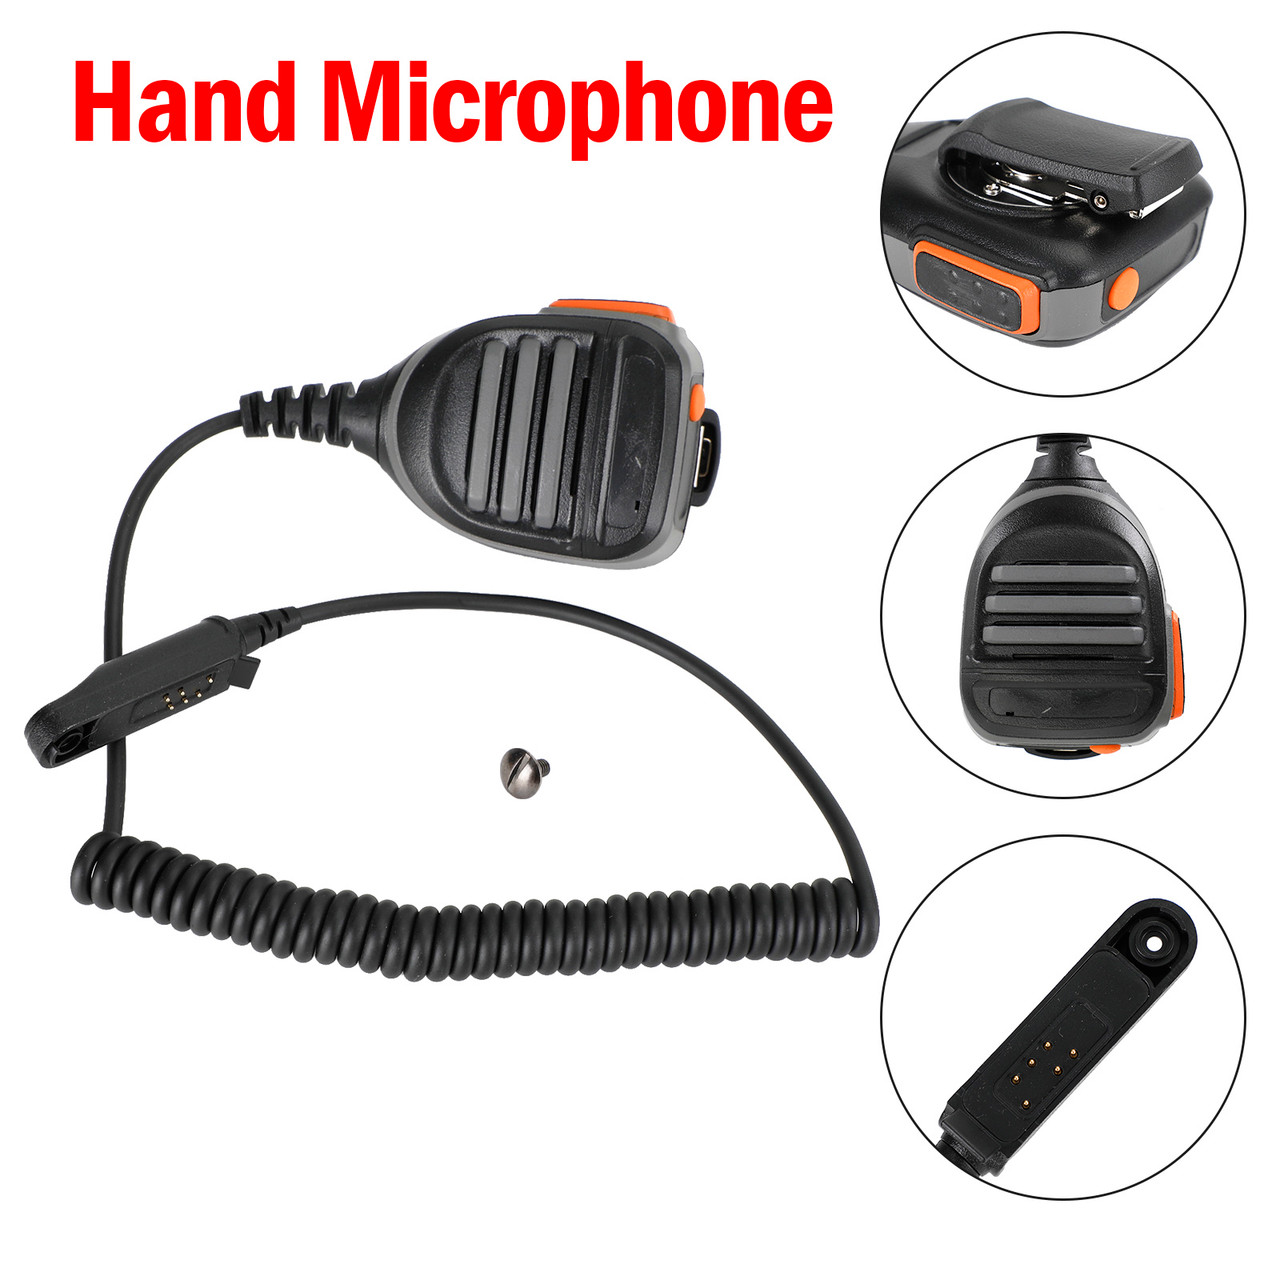 Hand Microphone Speaker Fit for Baofeng A58 BF9700 GT-3WP 9R UV-XR R760 Radio